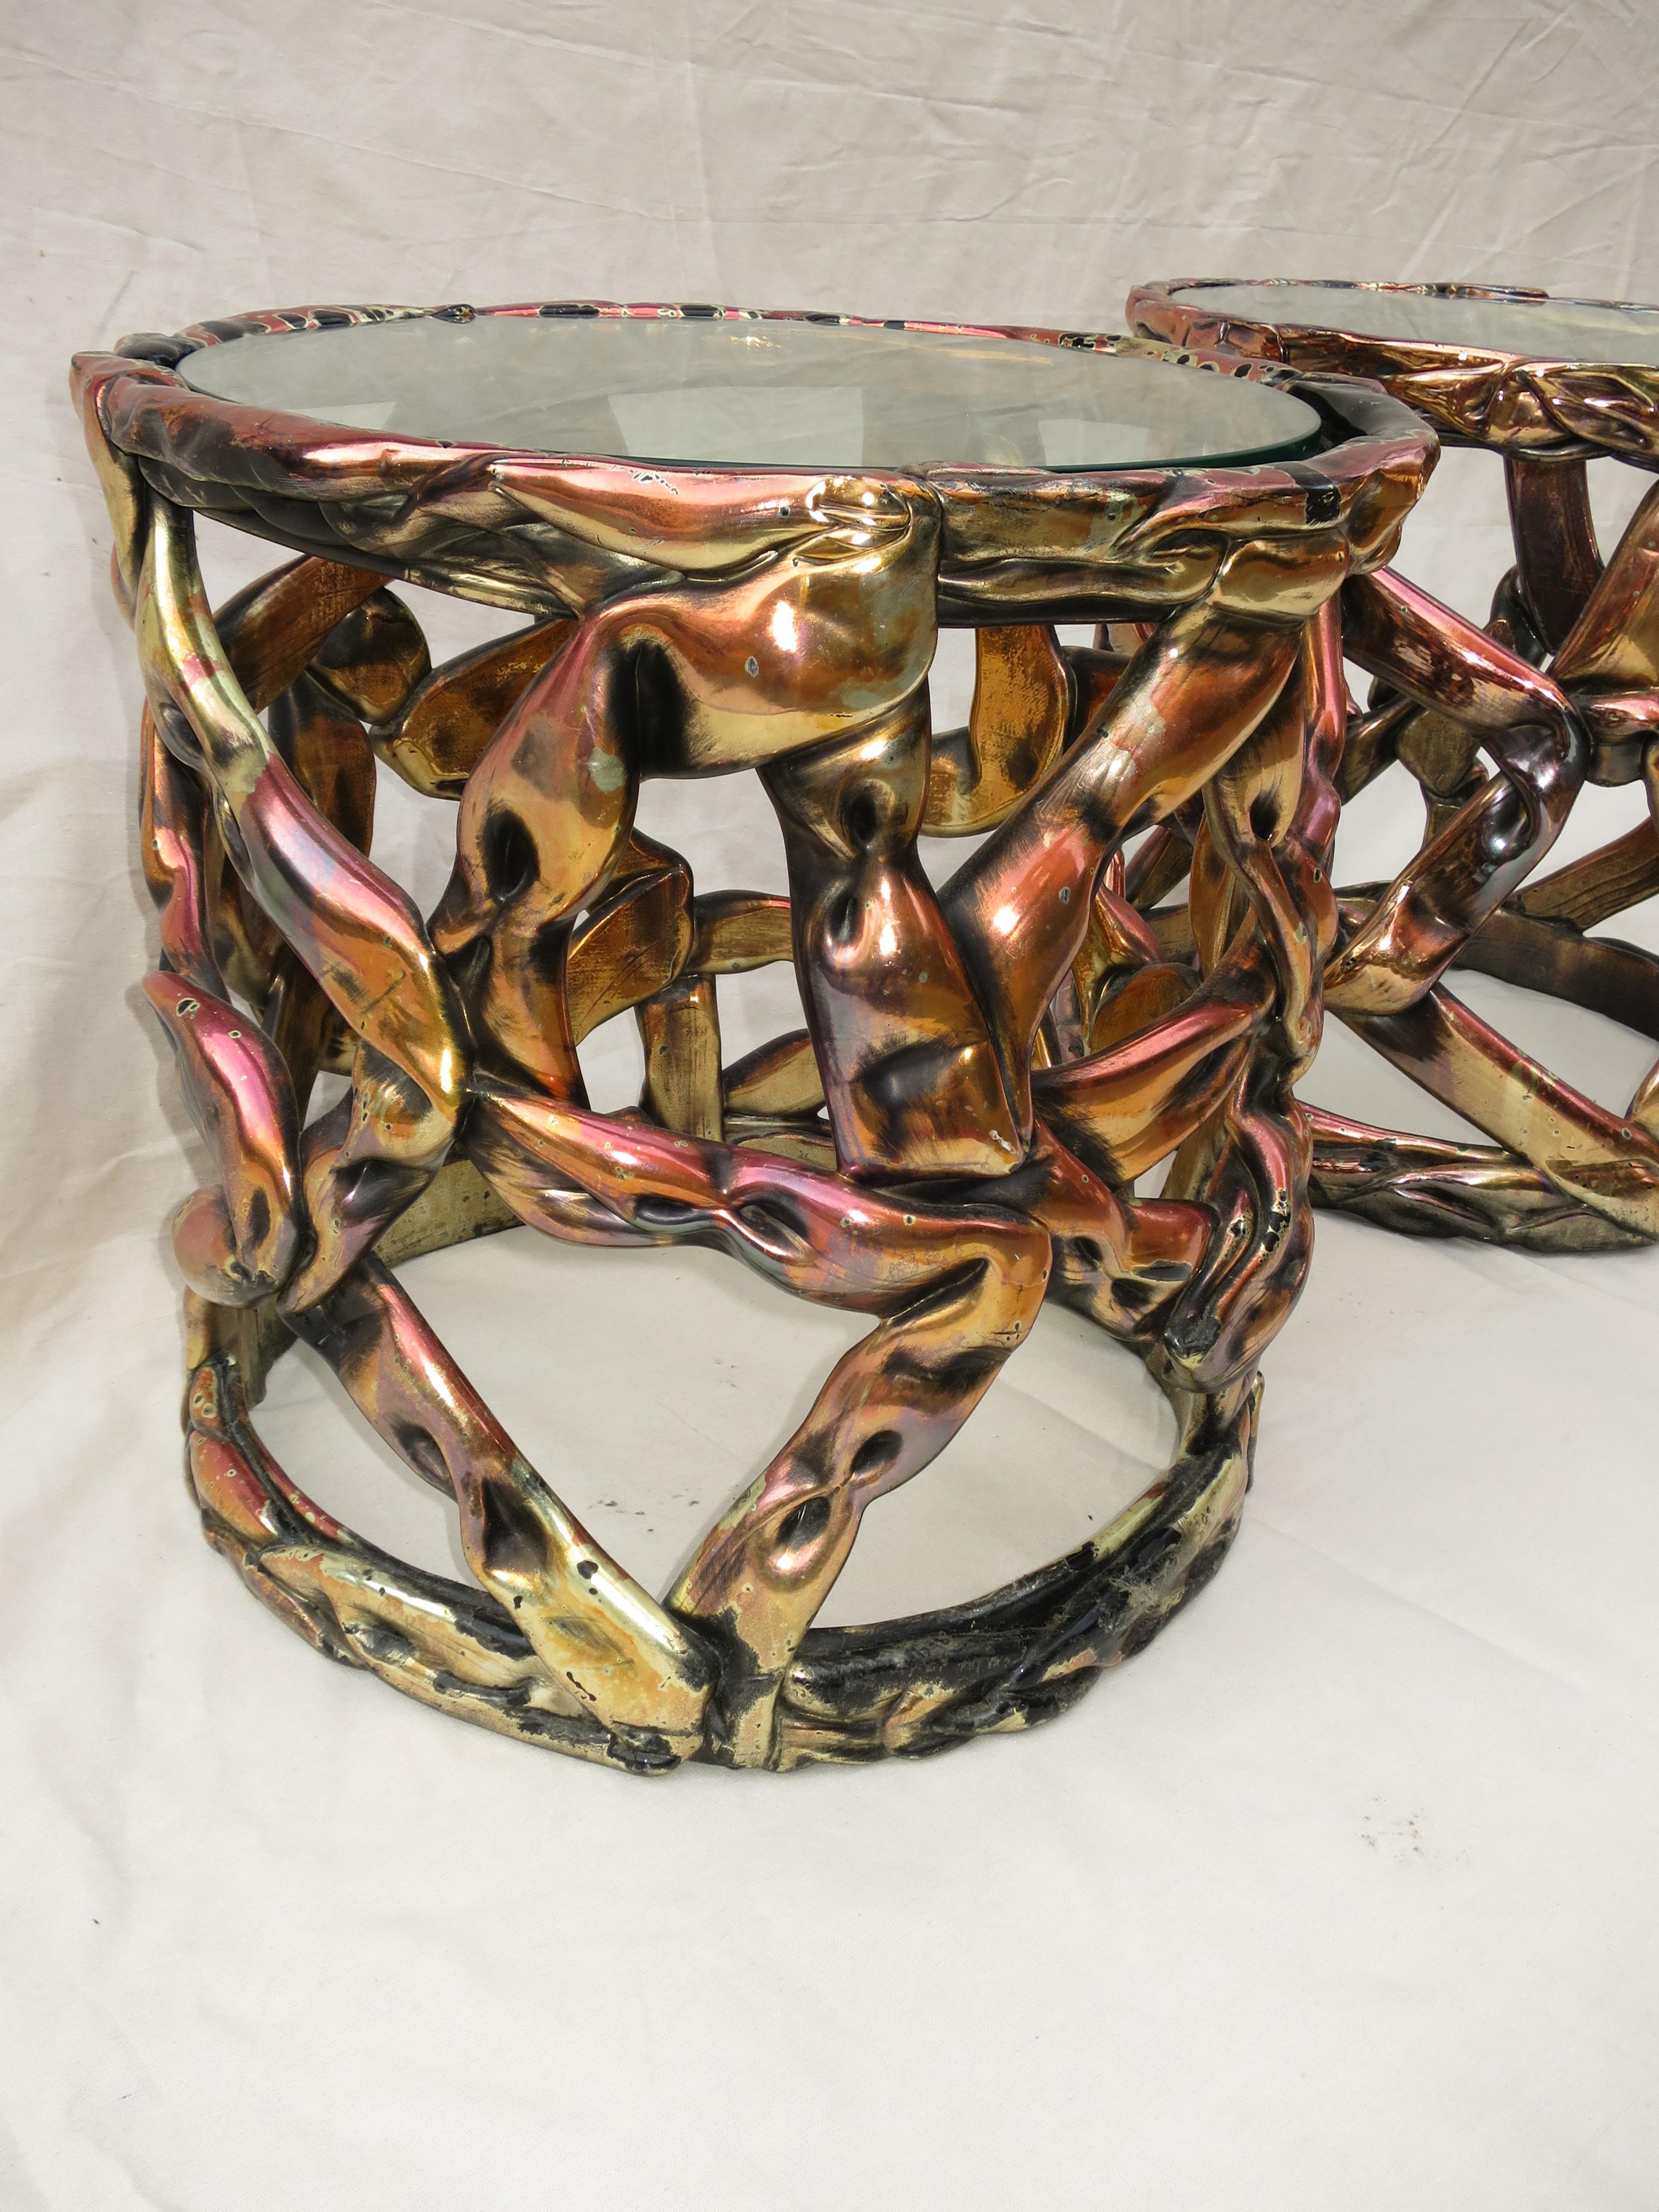 Pair of Ribbon side tables of extruded resin with gold and brass warm tones, with inset glass top.
A style created by Tony Duquette, Hollywood designer.